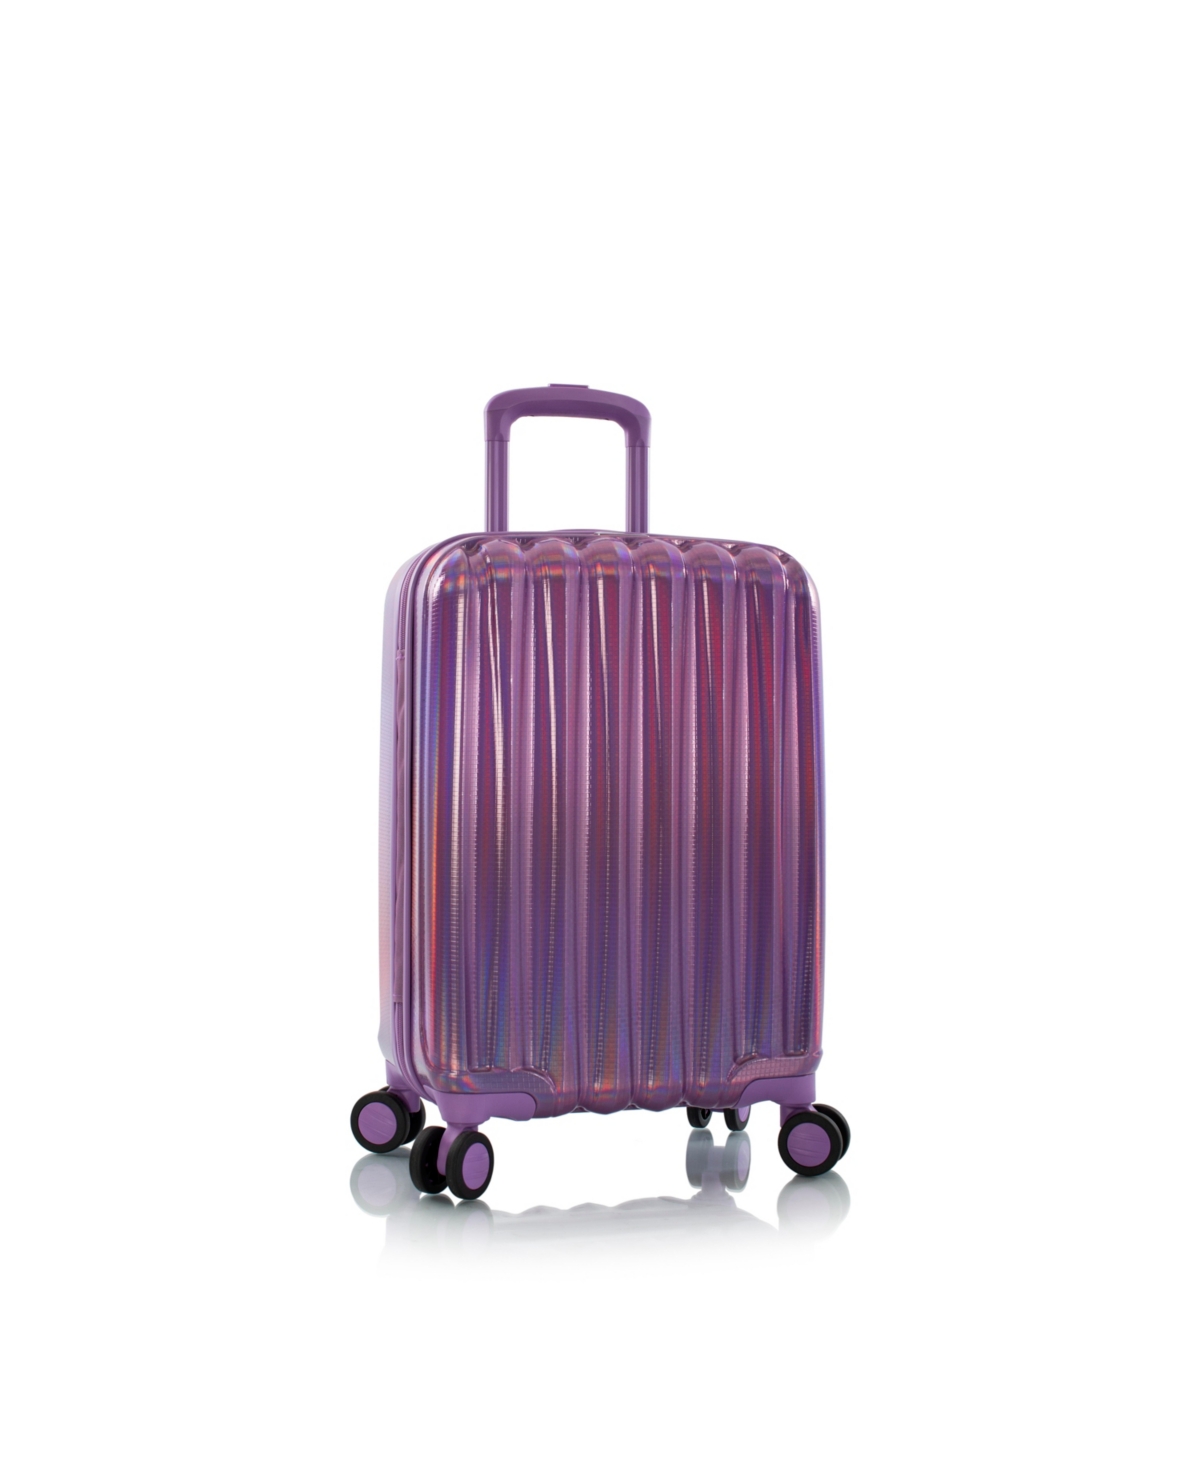 Heys Astro 21" Hardside Carry-on Spinner Luggage In Purple